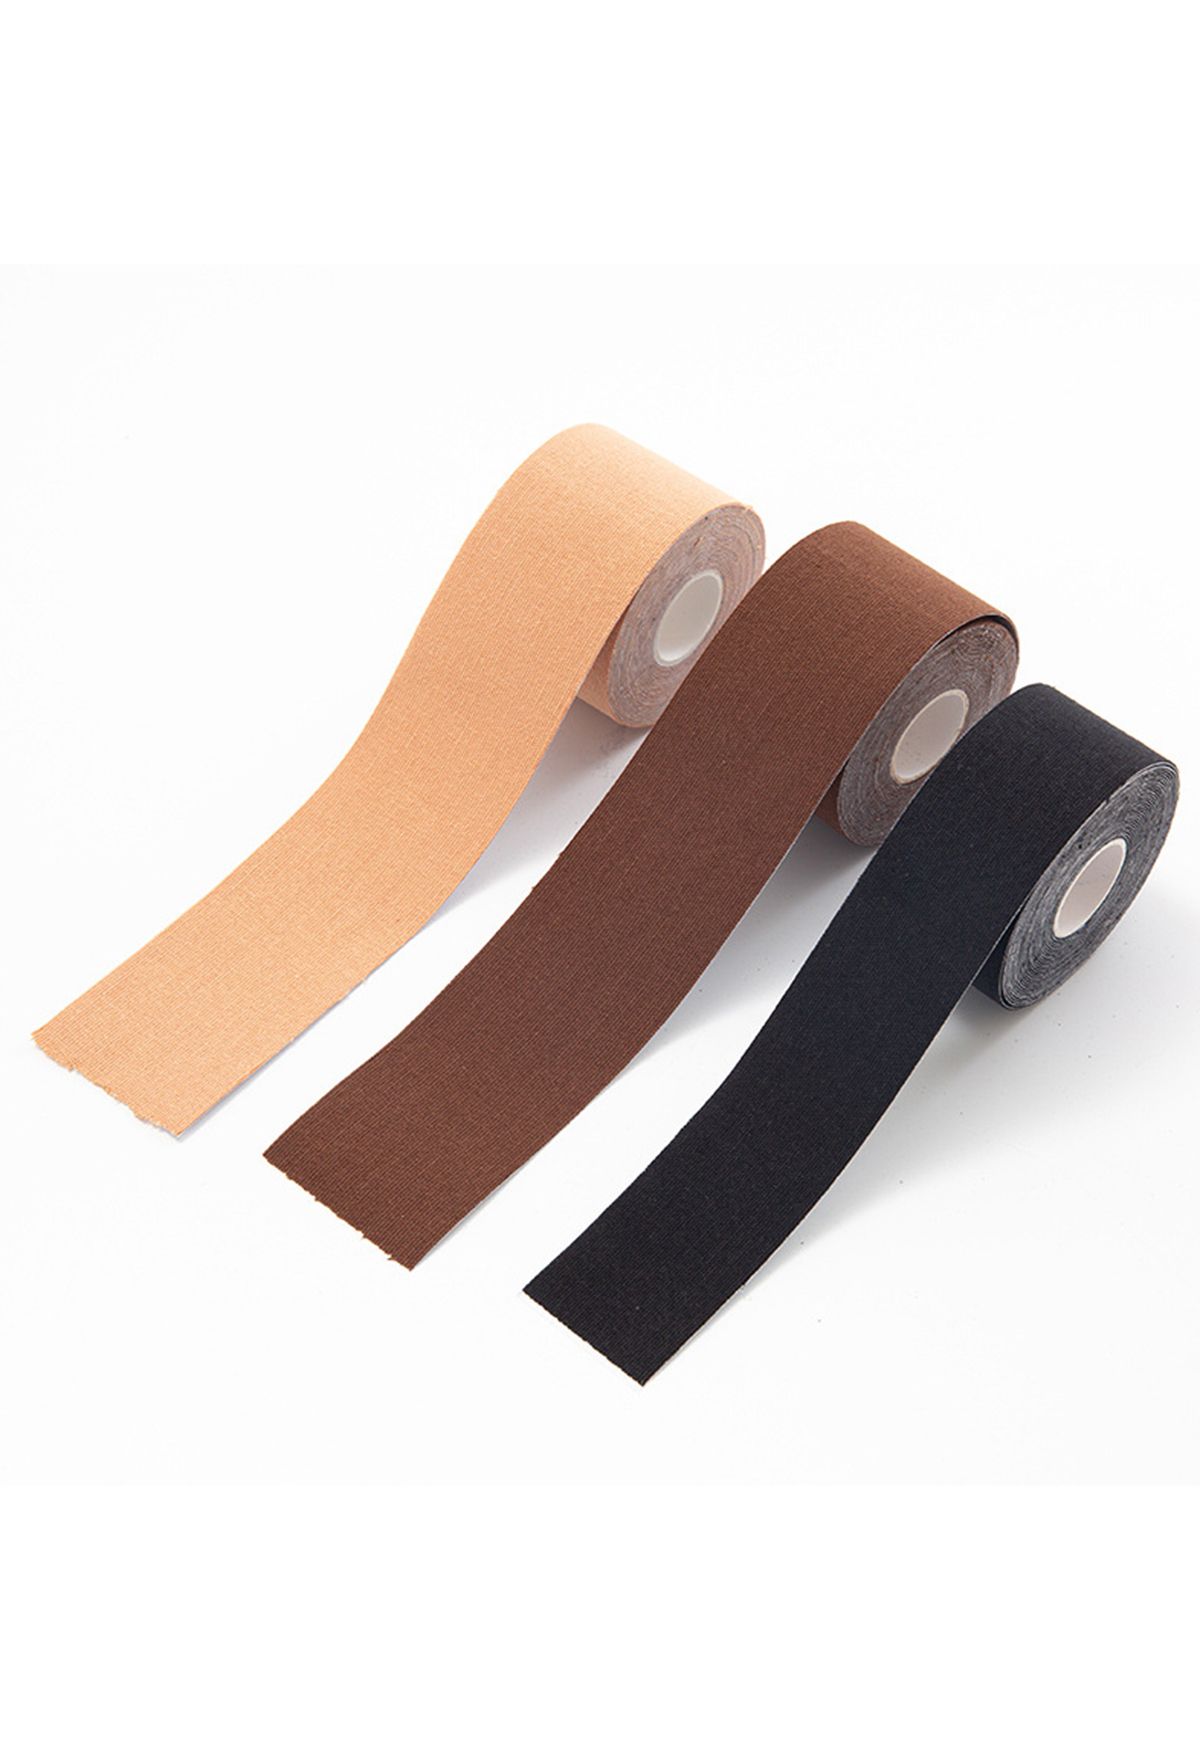 Breast-Lifted Solid Color Boob Tape